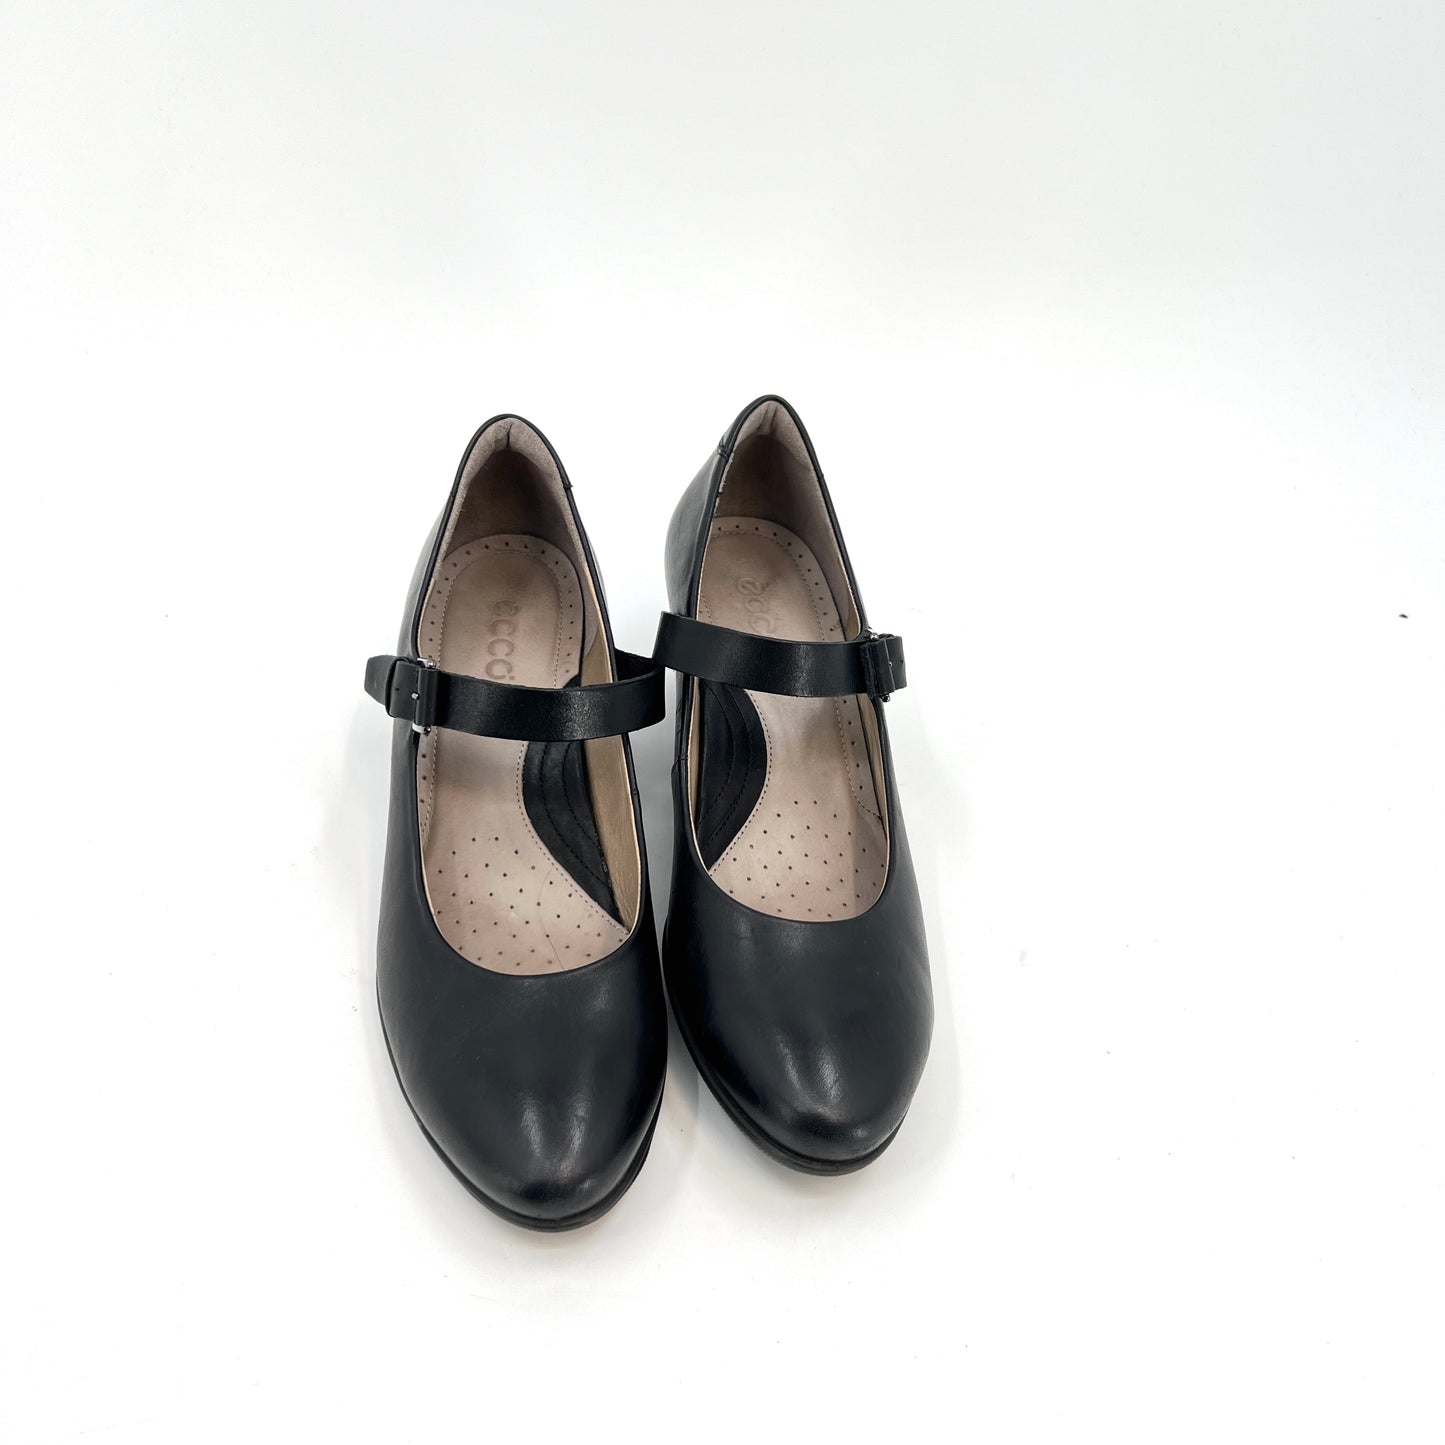 SOLD. Ecco Leather Mary Janes Shoes  41EU